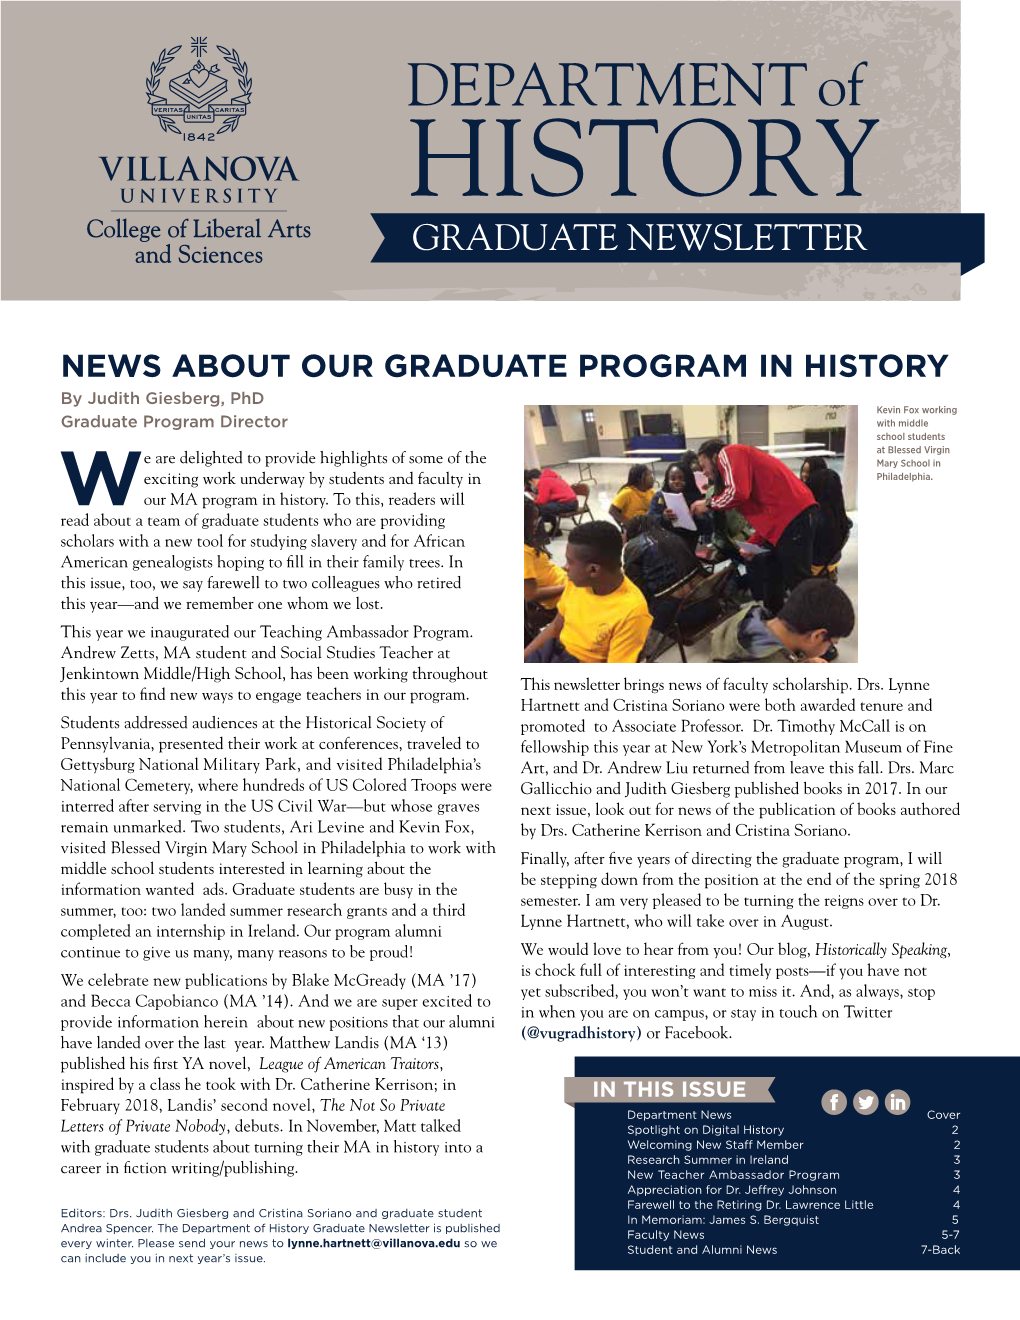 News About Our Graduate Program in History